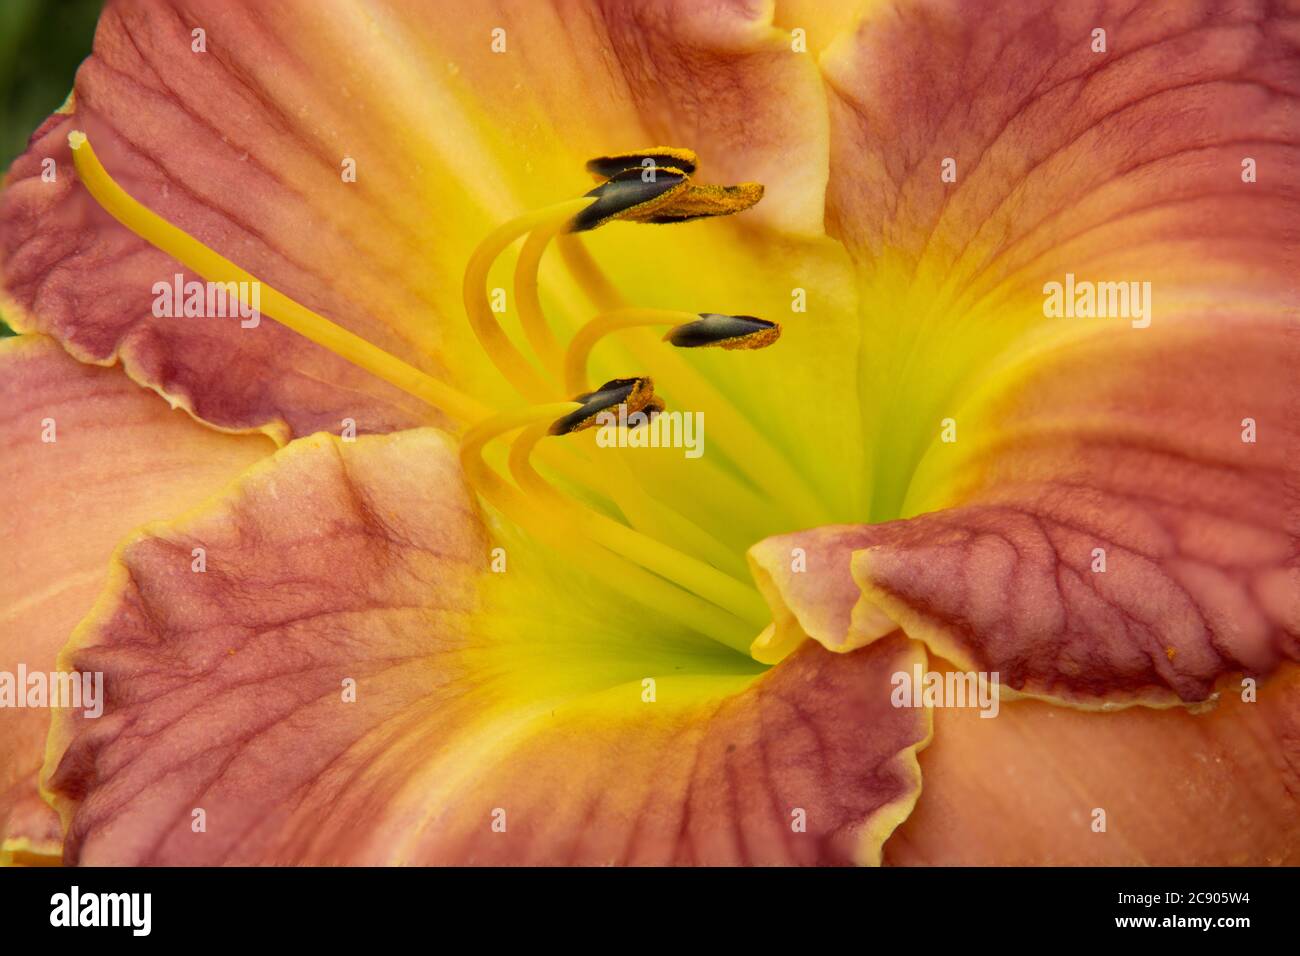 Closeup of gorgeous daylily blossom (Hemerocallis) with yellow throat. Ruffled petals are a blend of rose and pink with yellow along the edges. Stock Photo